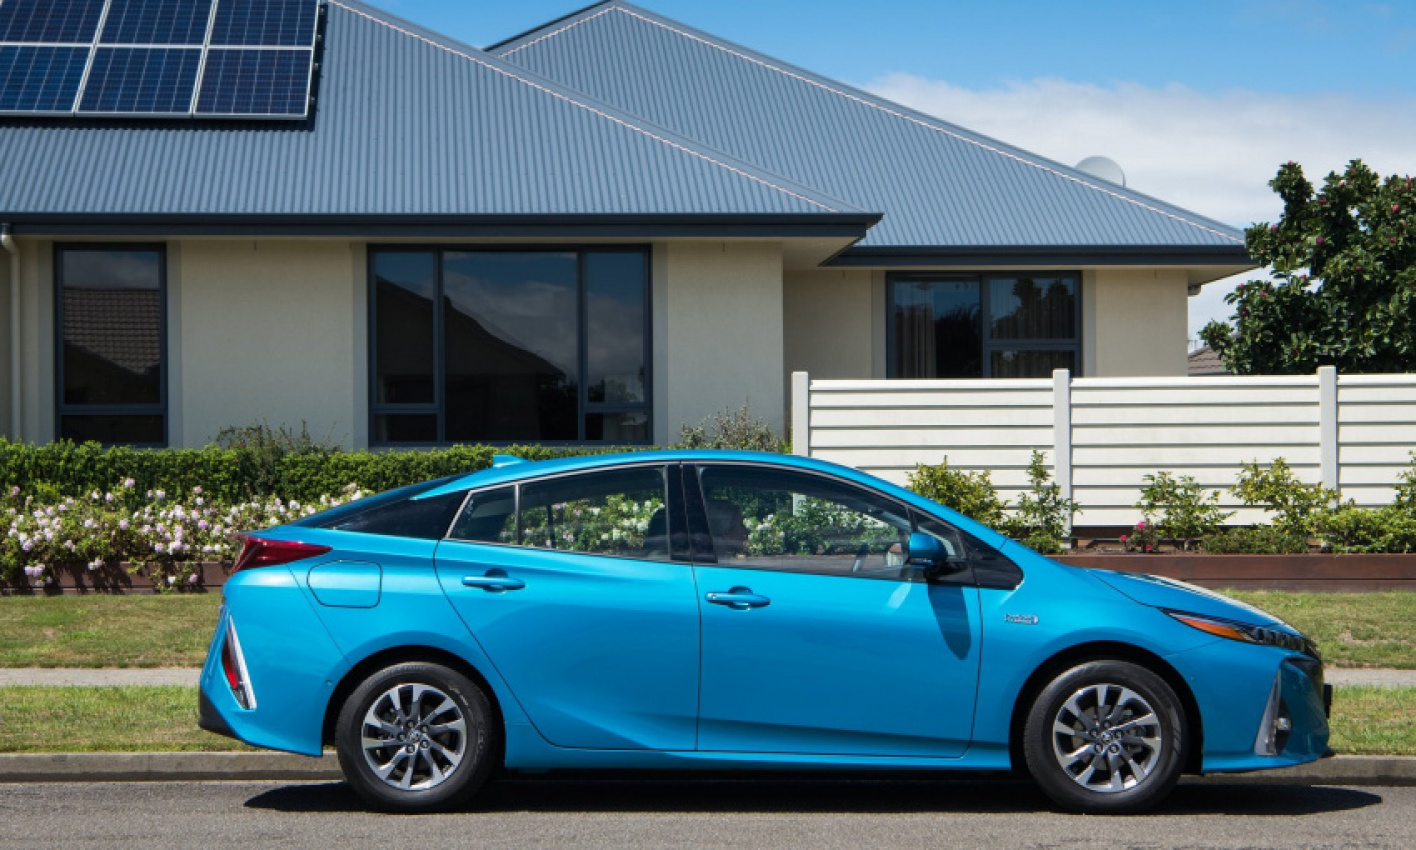 autos, cars, reviews, automotive industry, car, car advice, cars, driven, driven nz, electric cars, hybrid, motoring, national, new zealand, news, nz, road tests, ultimate phev guide: every plug-in hybrid electric car and suv you can buy in new zealand